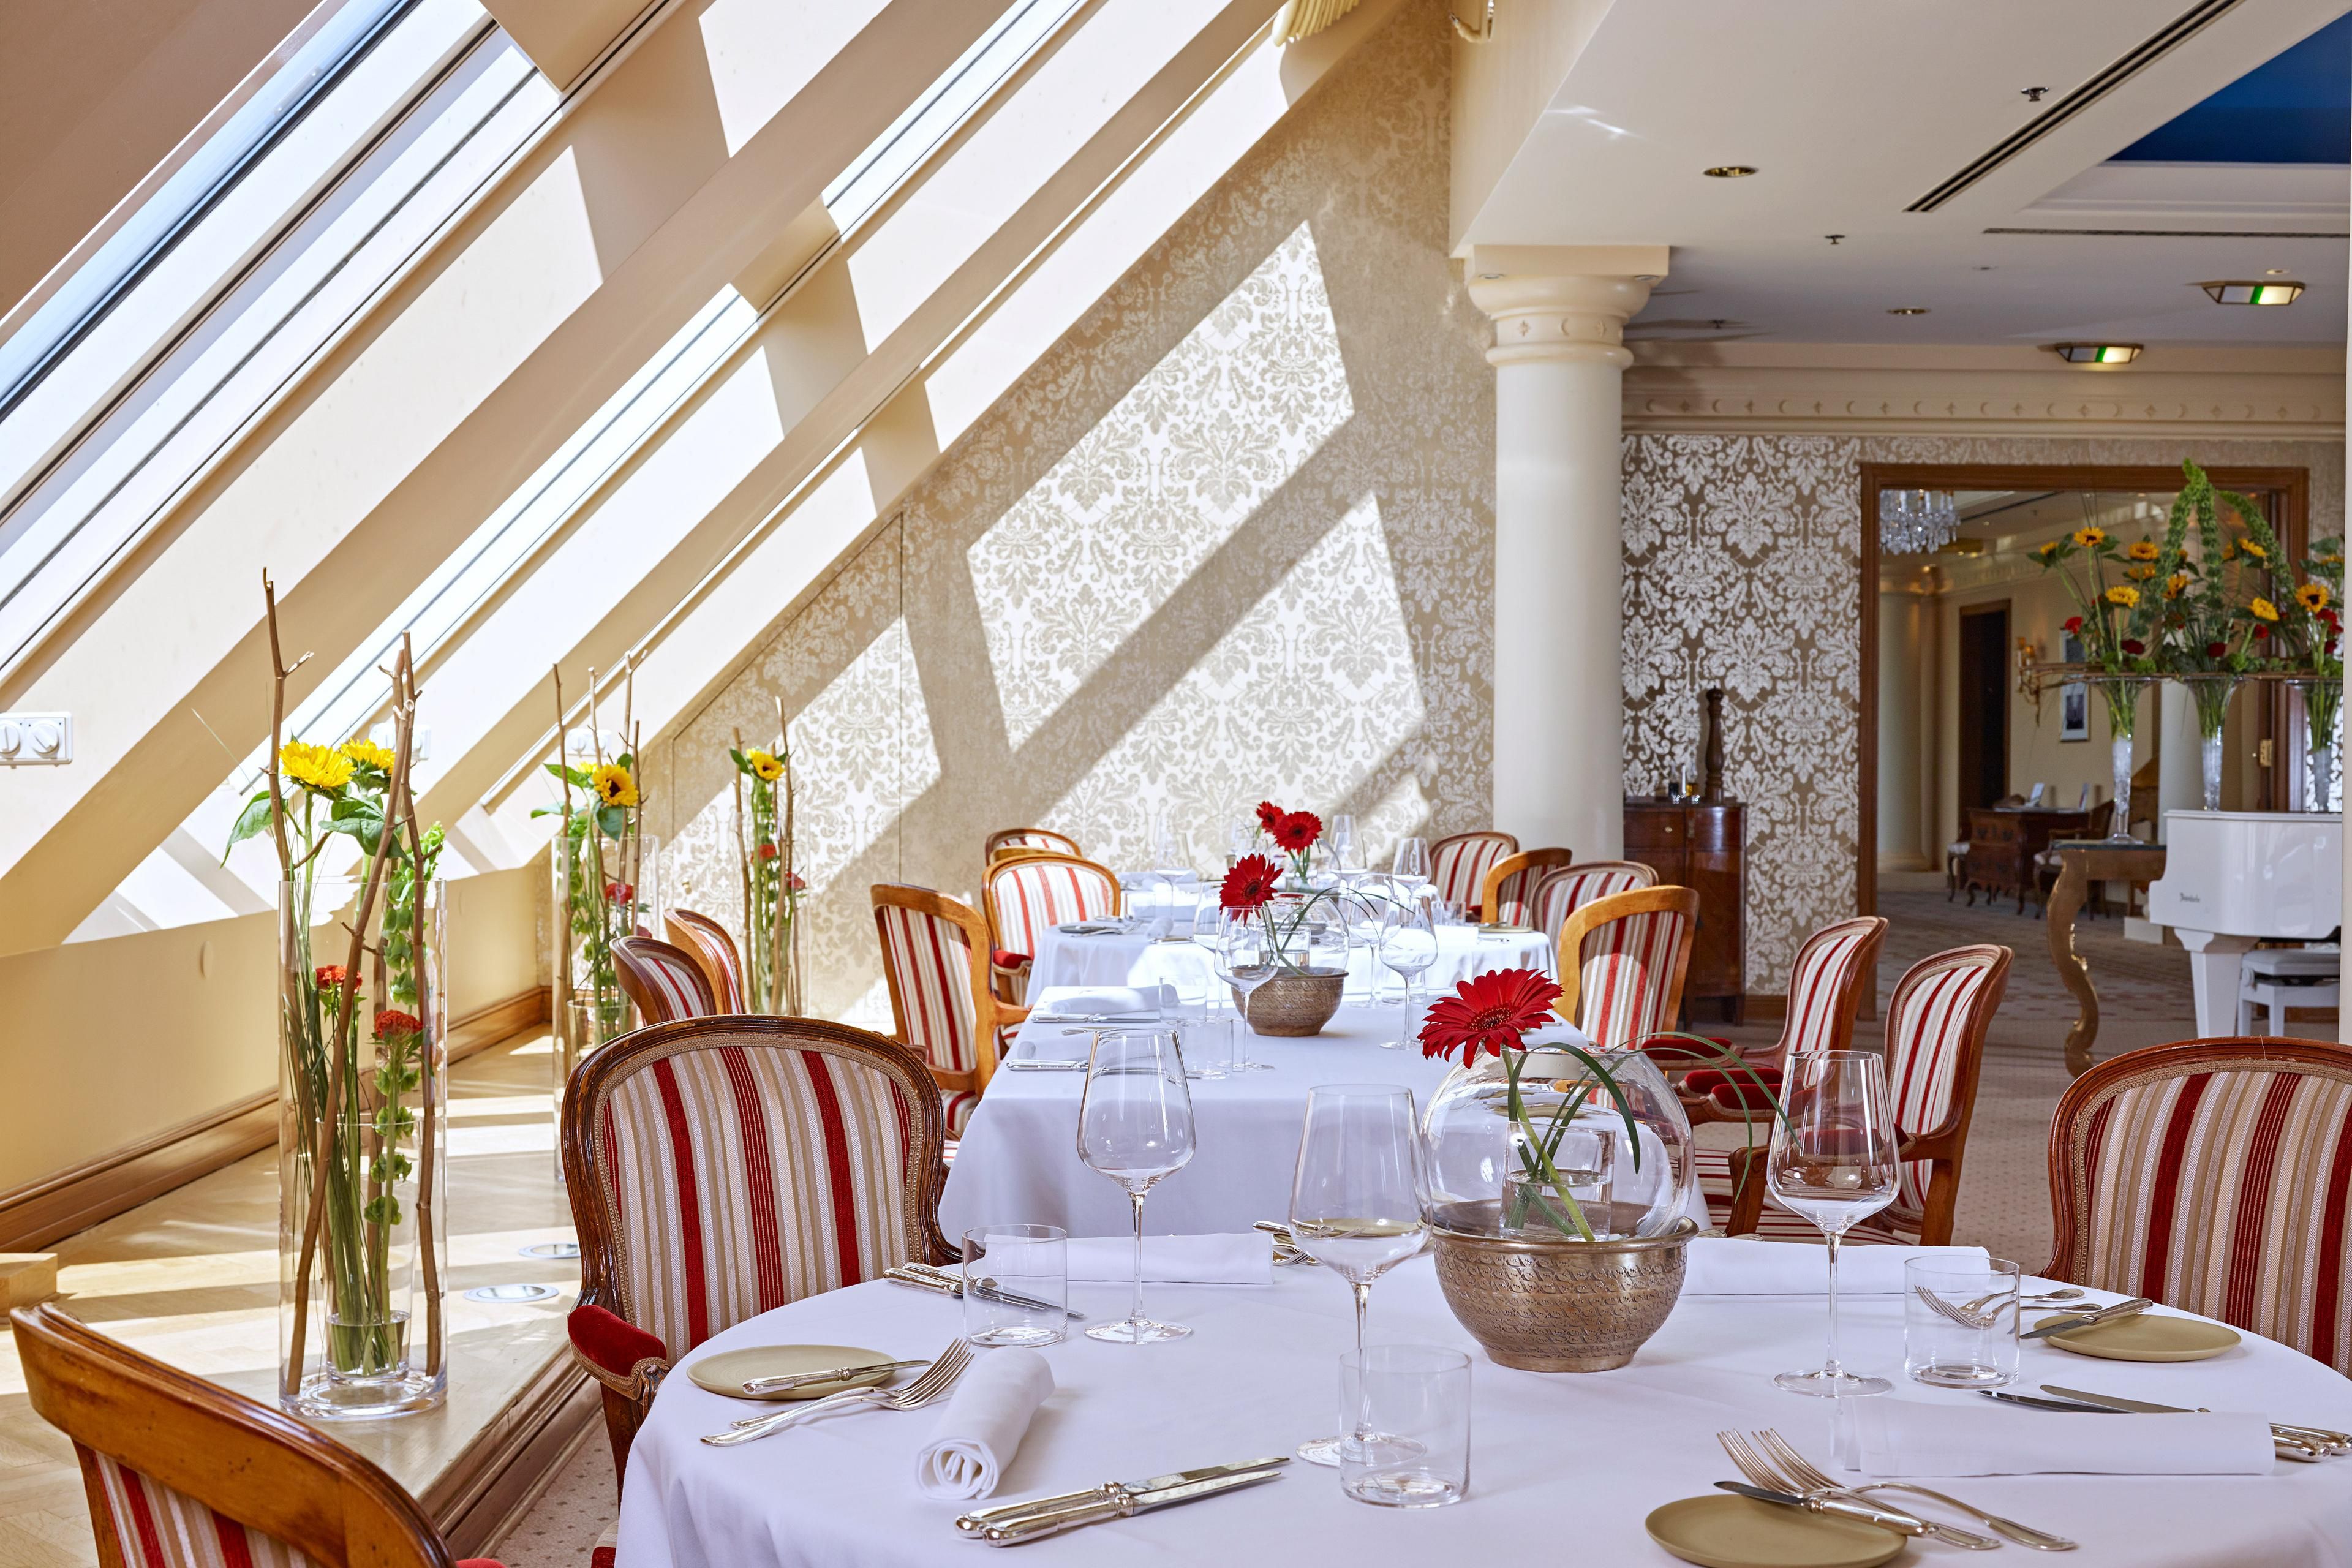 Enjoy high-class cuisine in our 1870 Restaurant... along with an amazing view across Vienna.